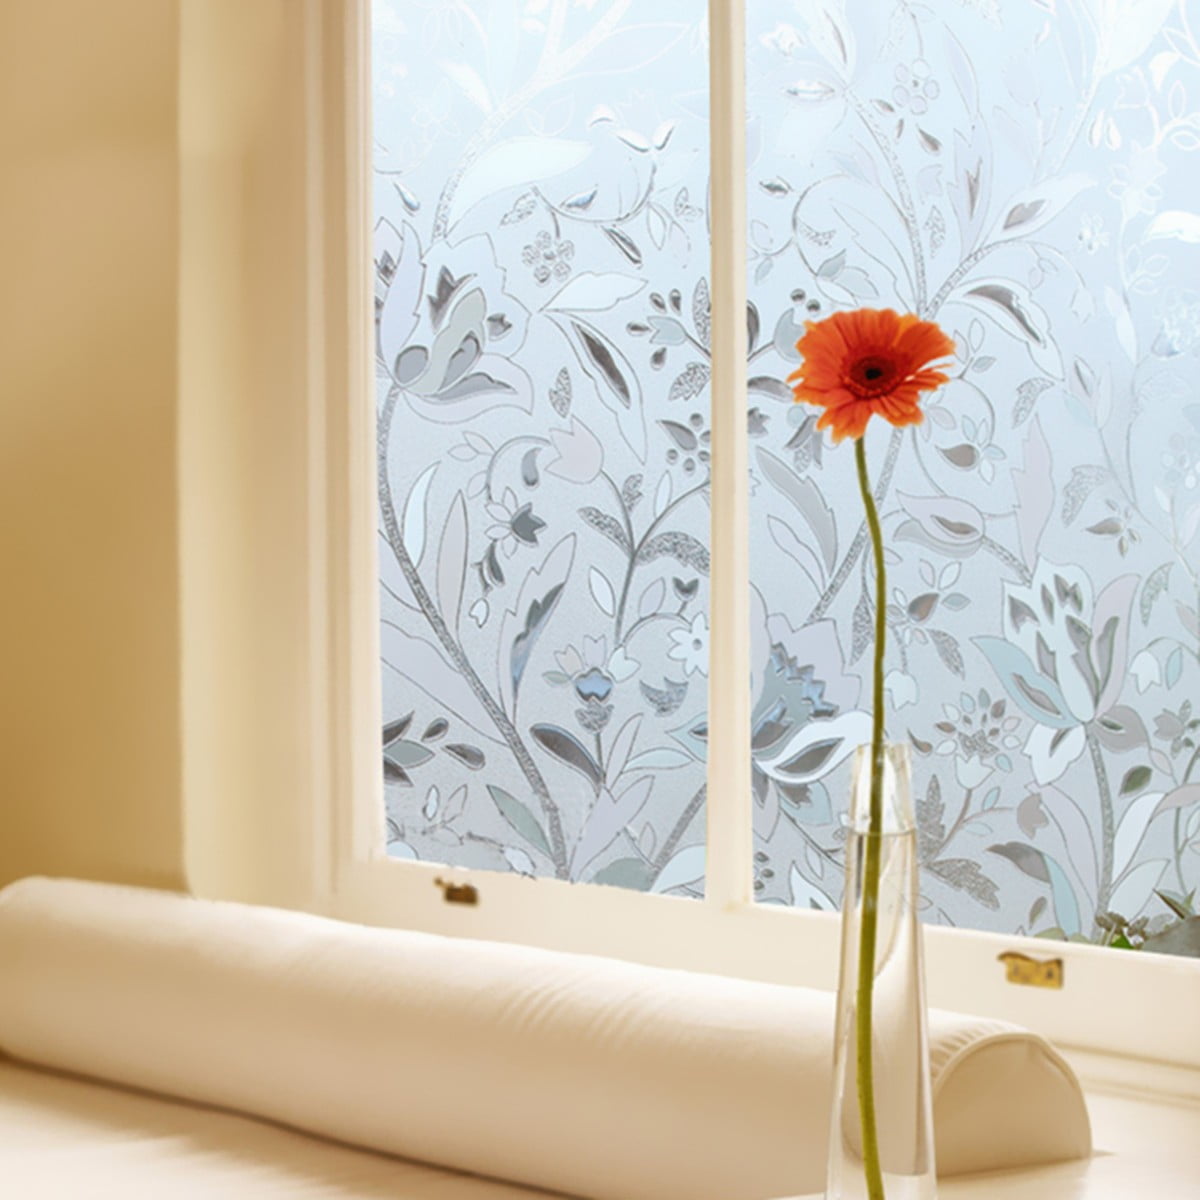 Waterproof PVC Privacy Frosted Sticker Glass Home Bedroom Bathroom Window Film 